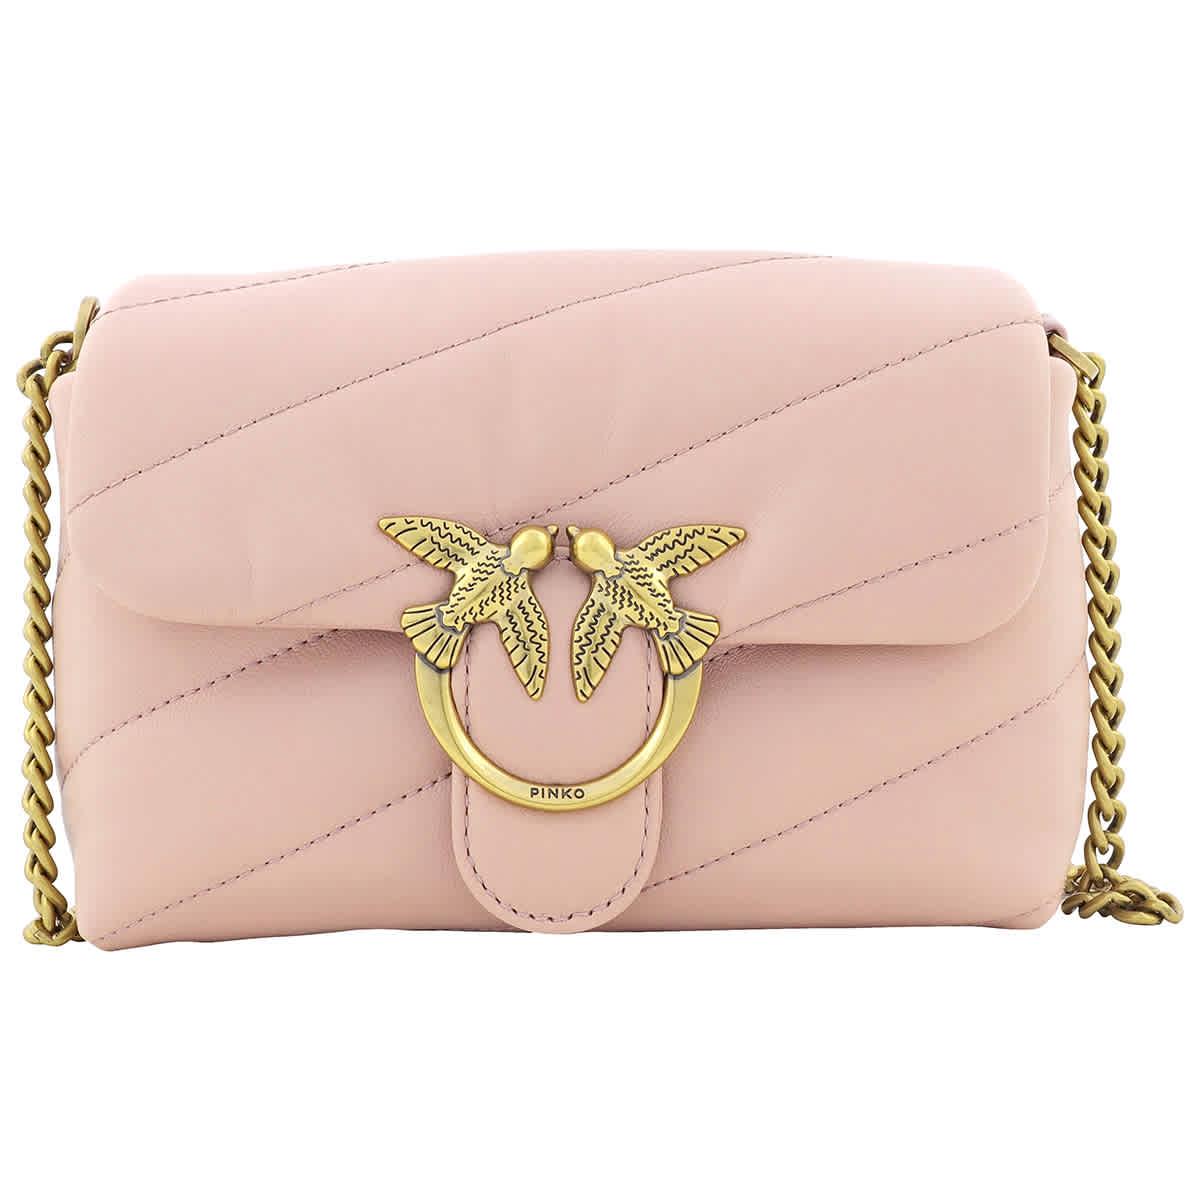 Pinko Ra/polvere Ra/antique Gold Baby Love Quilted Puff Bag in Pink | Lyst